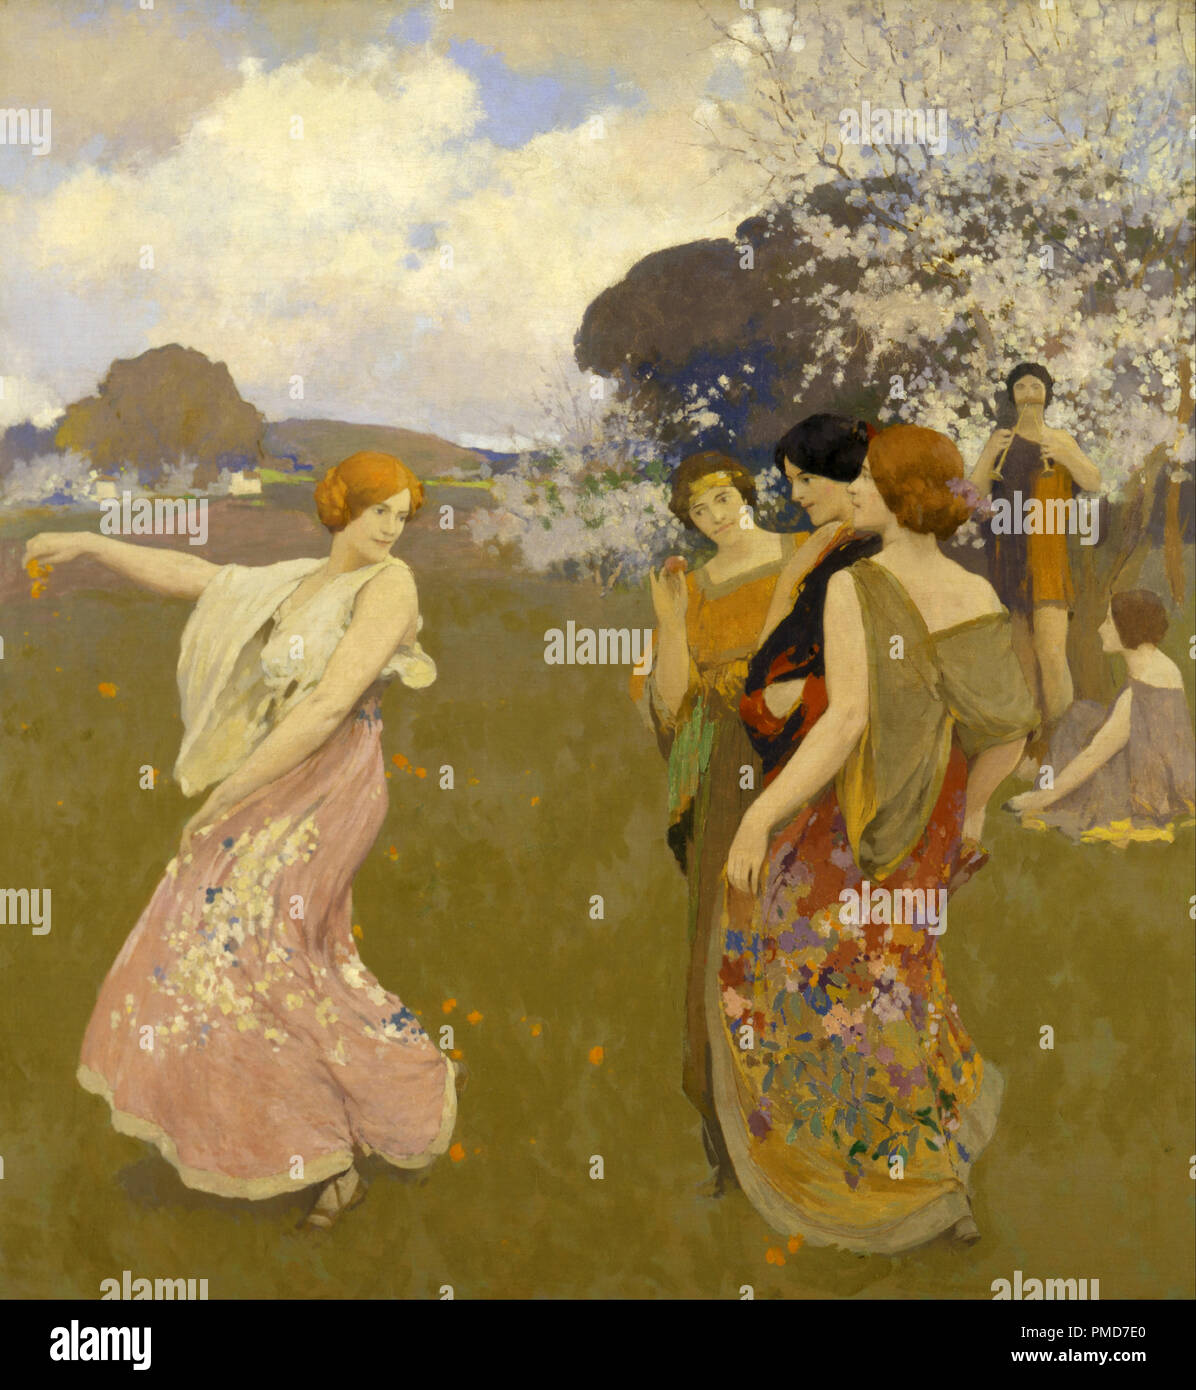 Spring Dance. Date/Period: Ca. 1917. Painting. Oil on canvas Oil on canvas. Height: 1,317.75 mm (51.87 in); Width: 1,209.80 mm (47.62 in). Author: Arthur F. Mathews. Mathews, Arthur Frank. Stock Photo